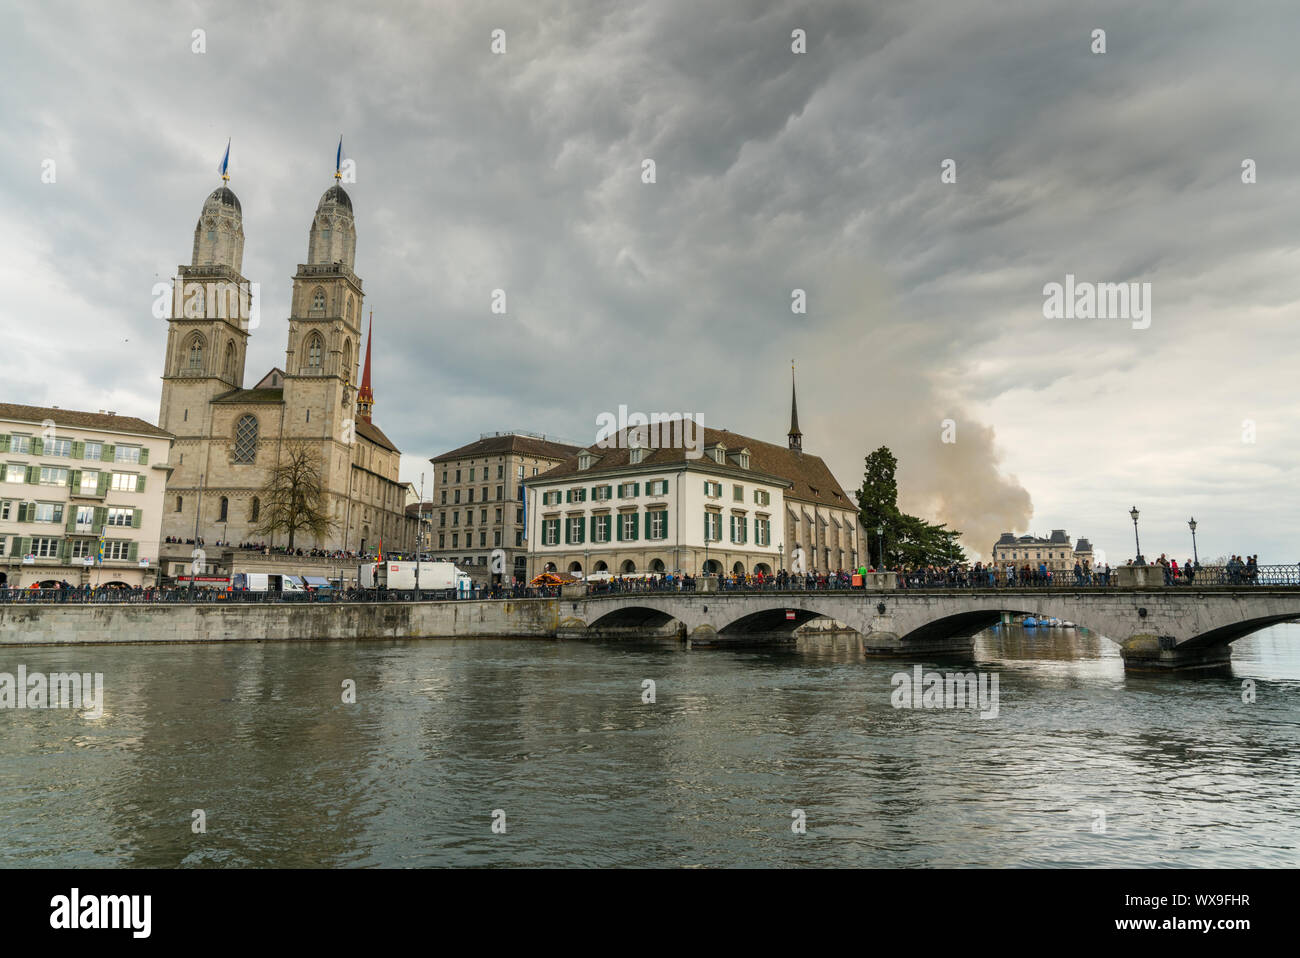 Zurich, ZH / Switzerland - April 8, 2019: Zurich cityscape with many people crossing the river Limma Stock Photo